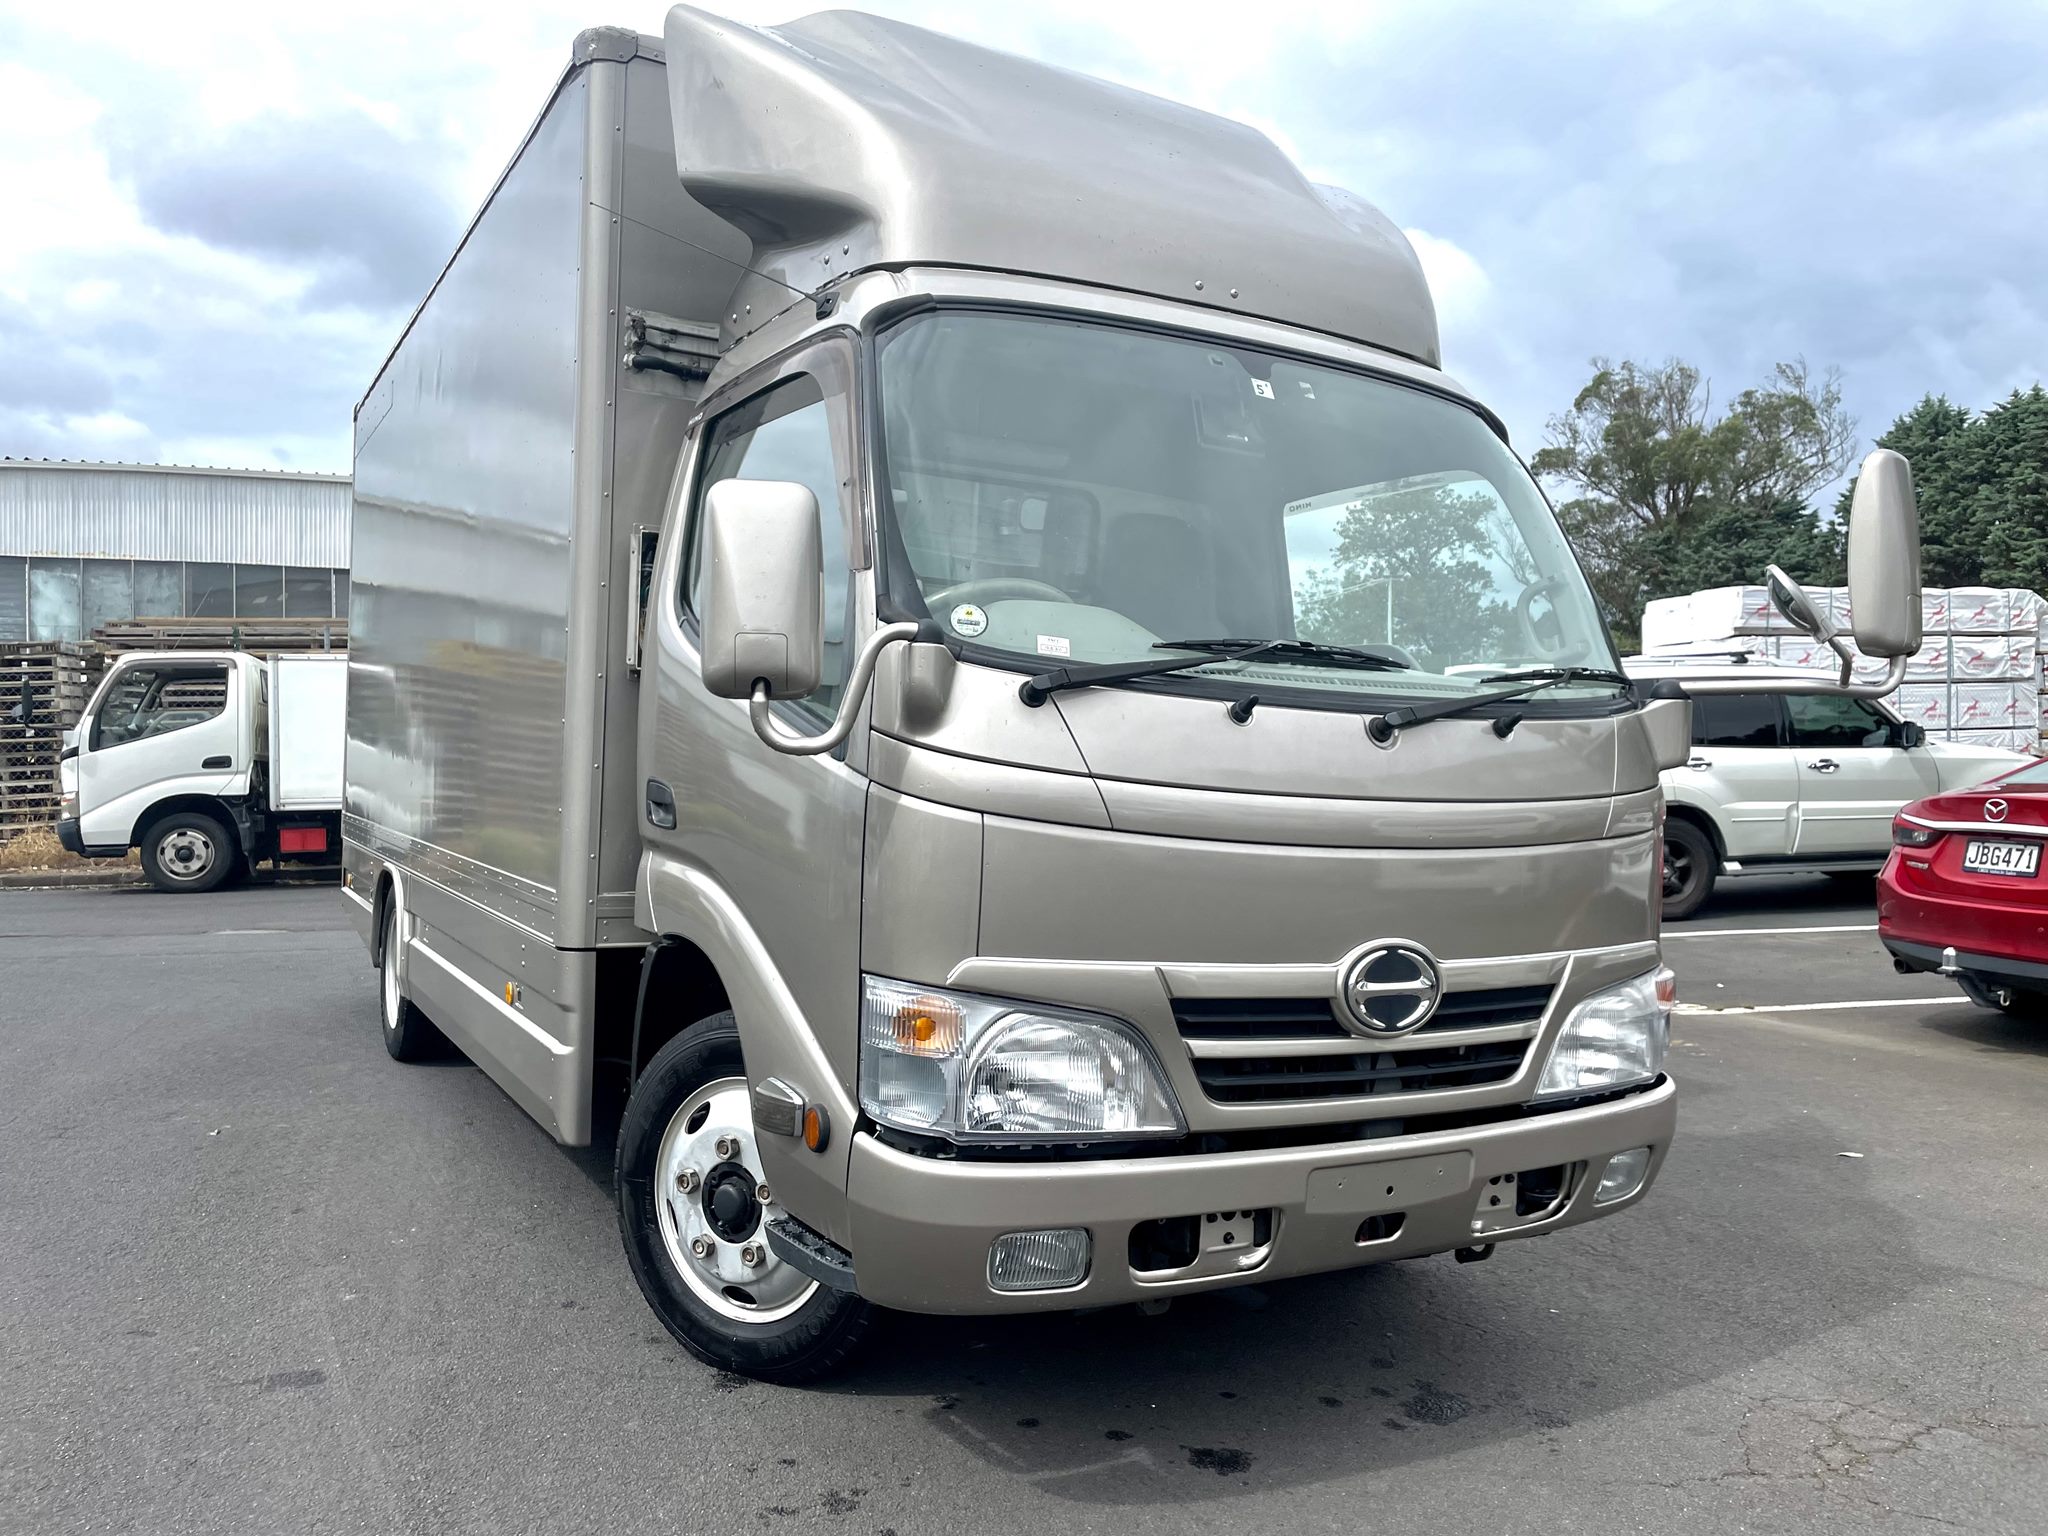 Top Quality Used Trucks For Sale In New Zealand